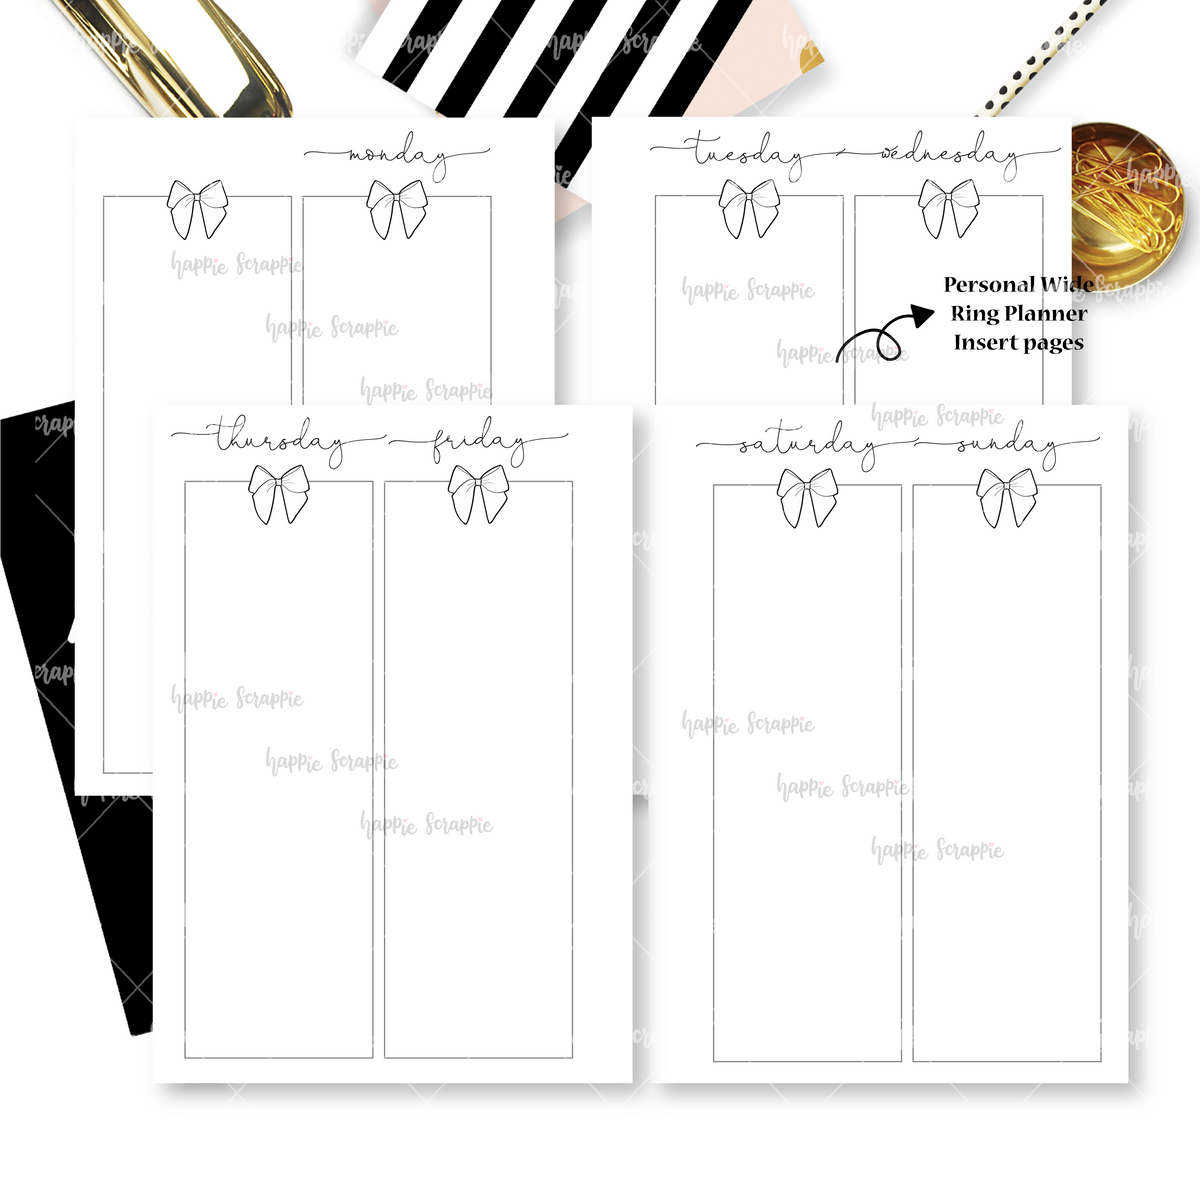 A6 Planner Inserts SVG Bundle, 6 A6 Pocket Pages Svg Cut Files for Cricut,  DIY Planner Inserts for A6 6 Ring Bound Planners 